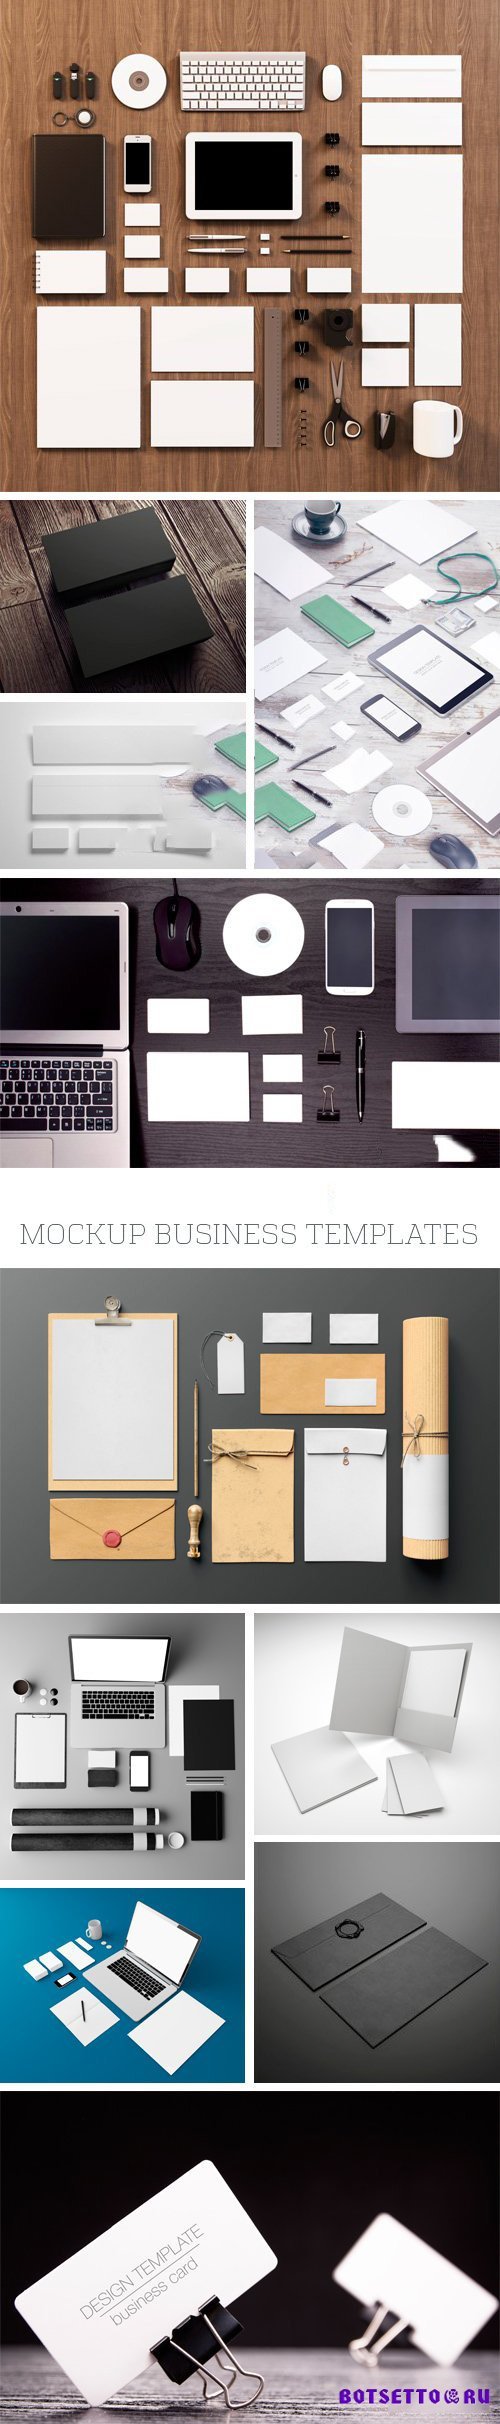 Stock Images - Mockup Business Templates, 25xJPGs